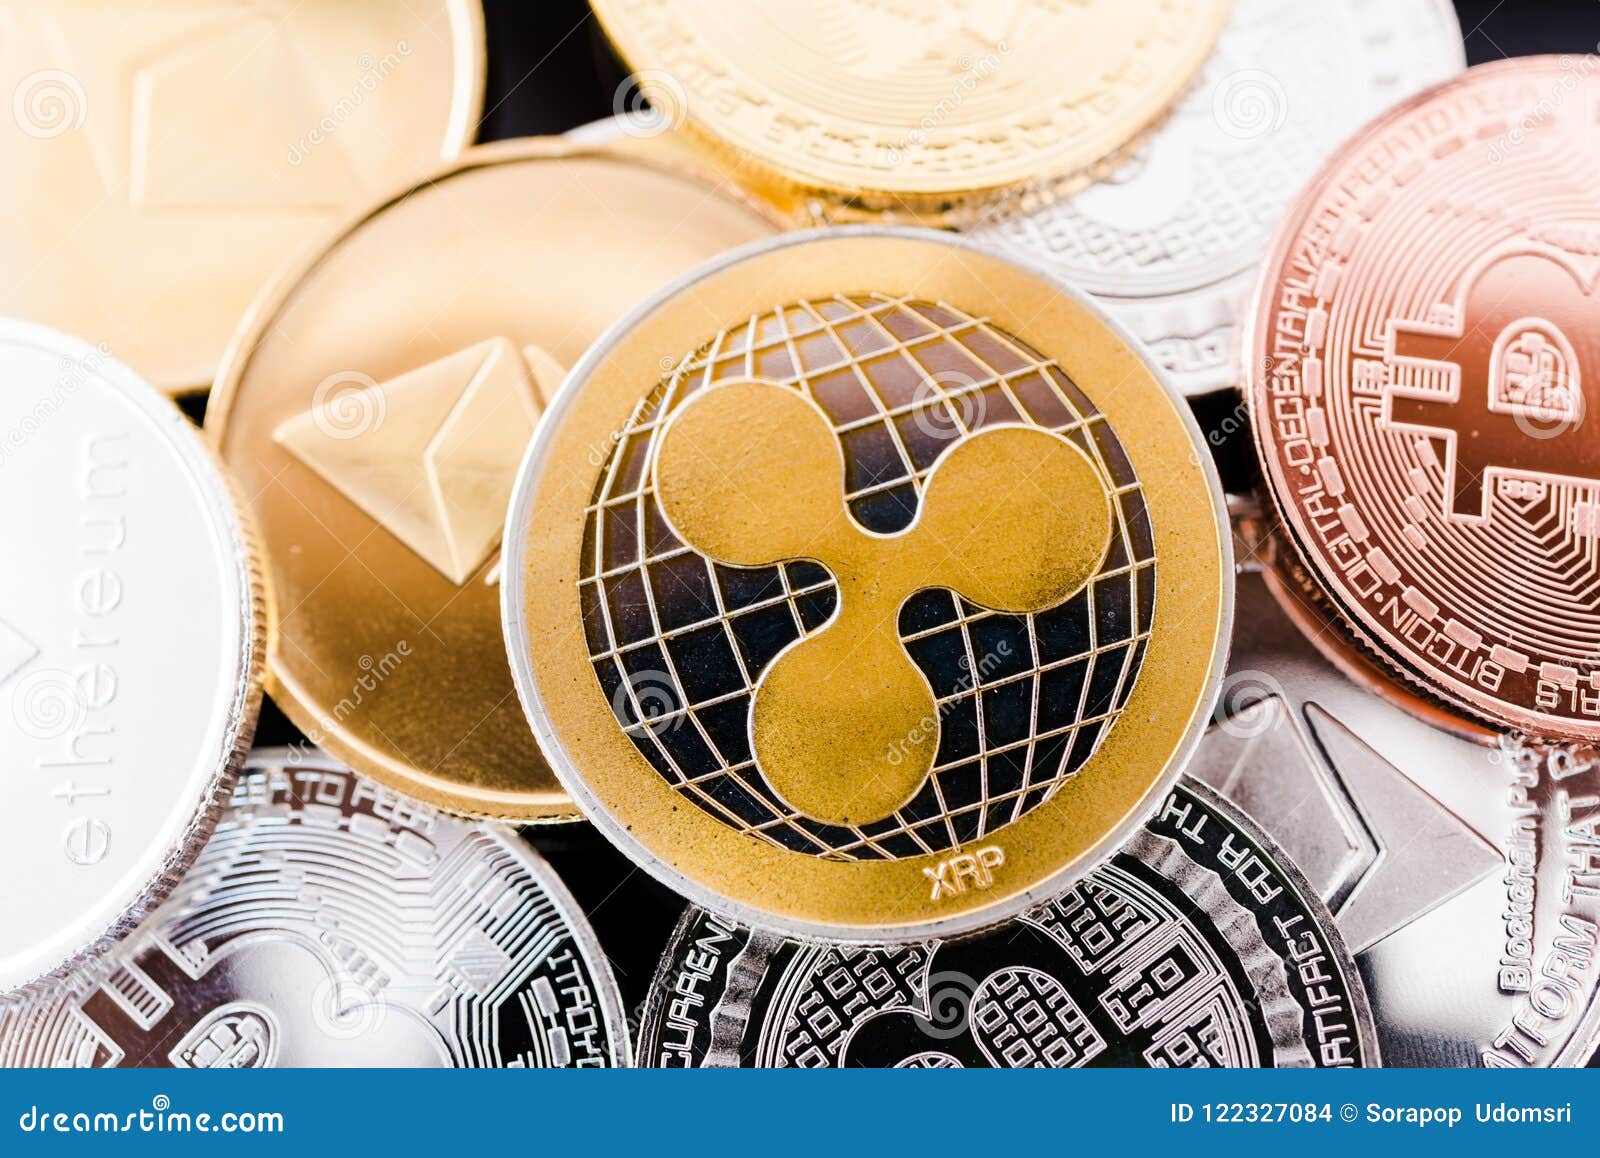 Metal Coins XRP Digital Cryptocurrency Stock Photo - Image ...